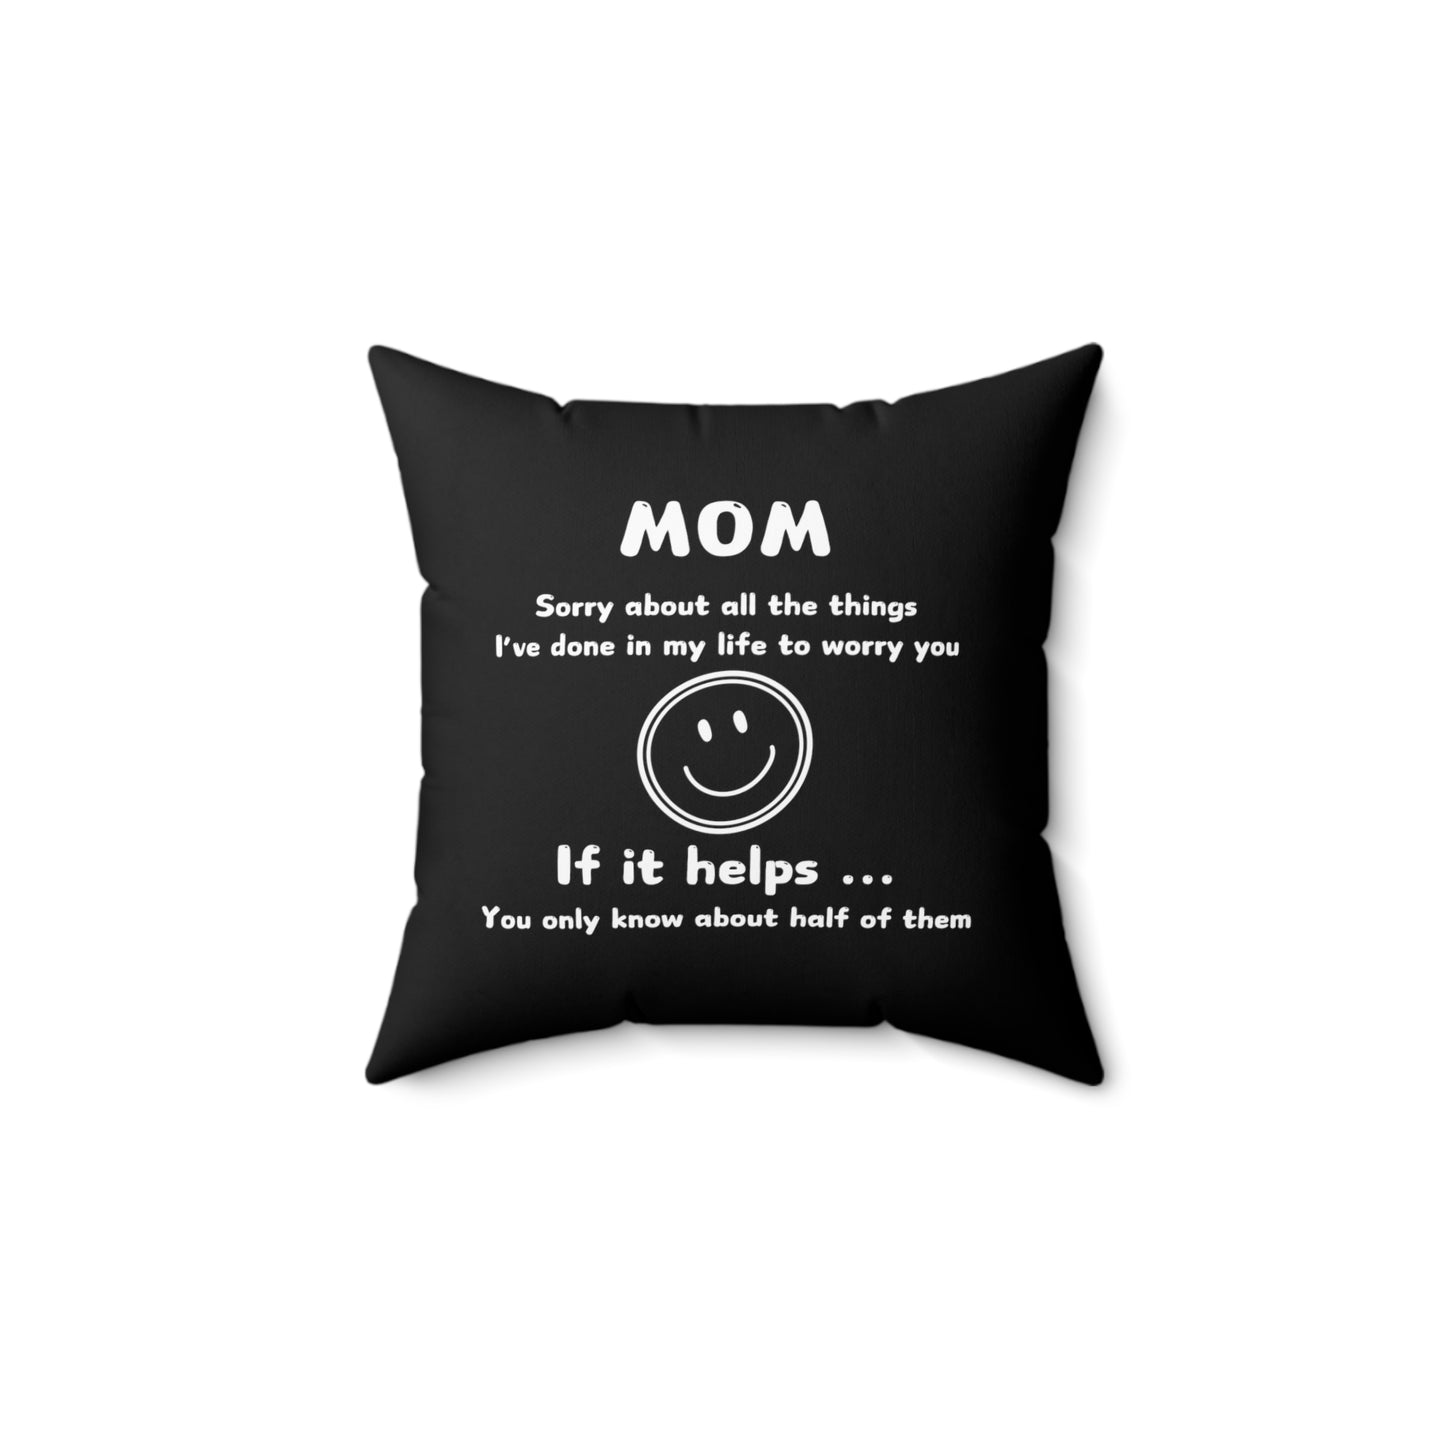 Mom, Sorry About All The Things I've Done in my Life to Worry You Square Pillow